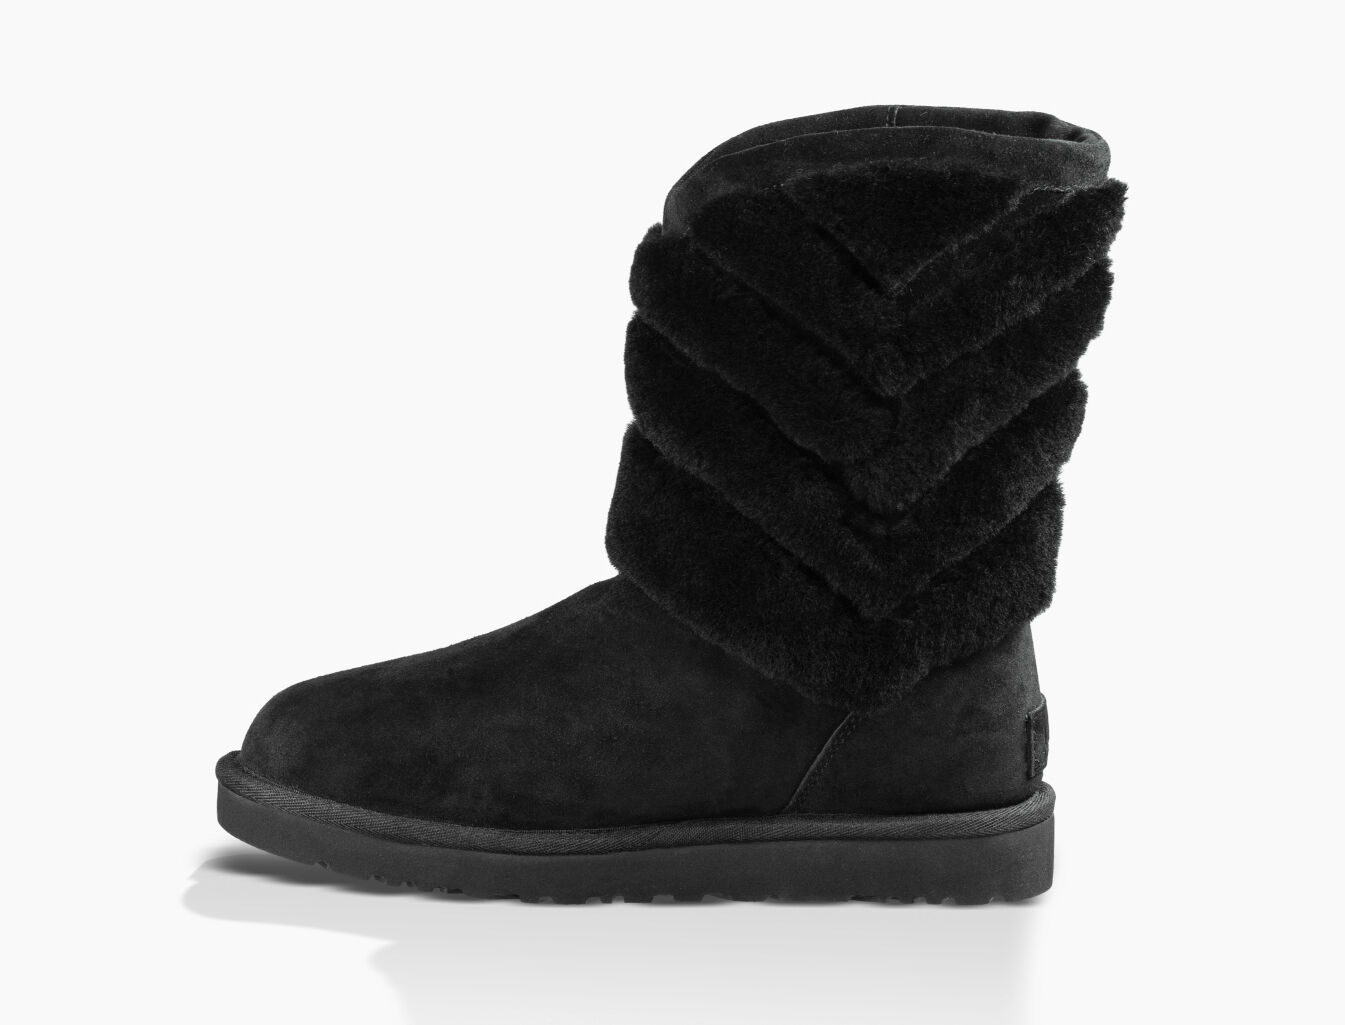 ugg tania genuine shearling suede boot